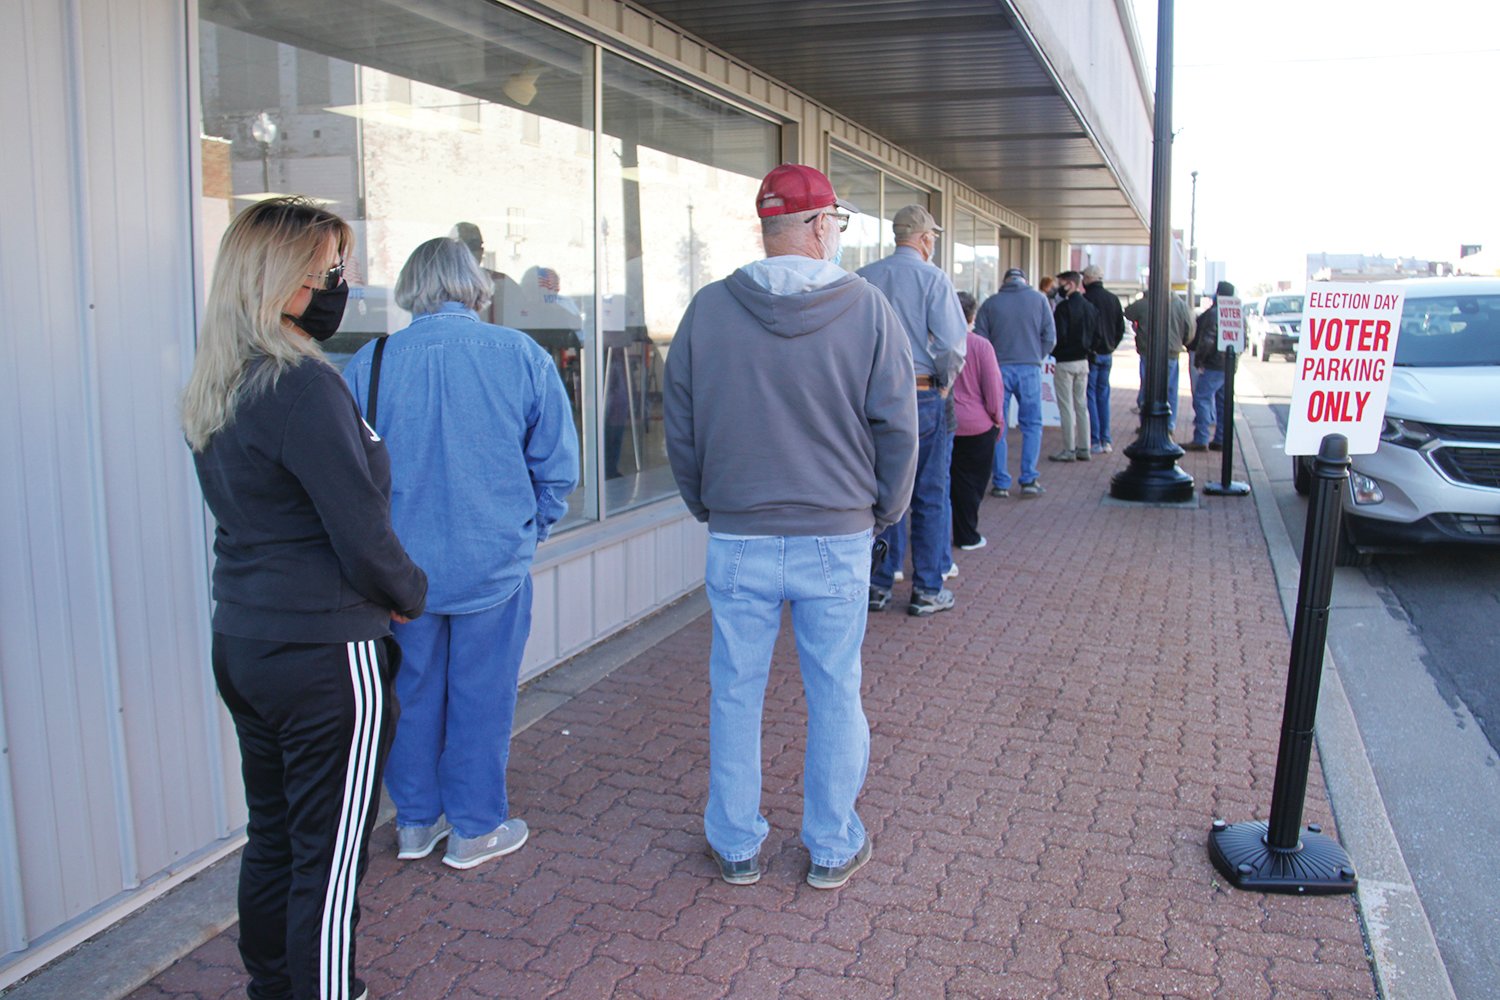 A line forms around 8:30 on election morning at the Courthouse Annex building in Mexico. Almost 70 percent of registered voters in Audrain County turned out on Tuesday. (Dave Faries)